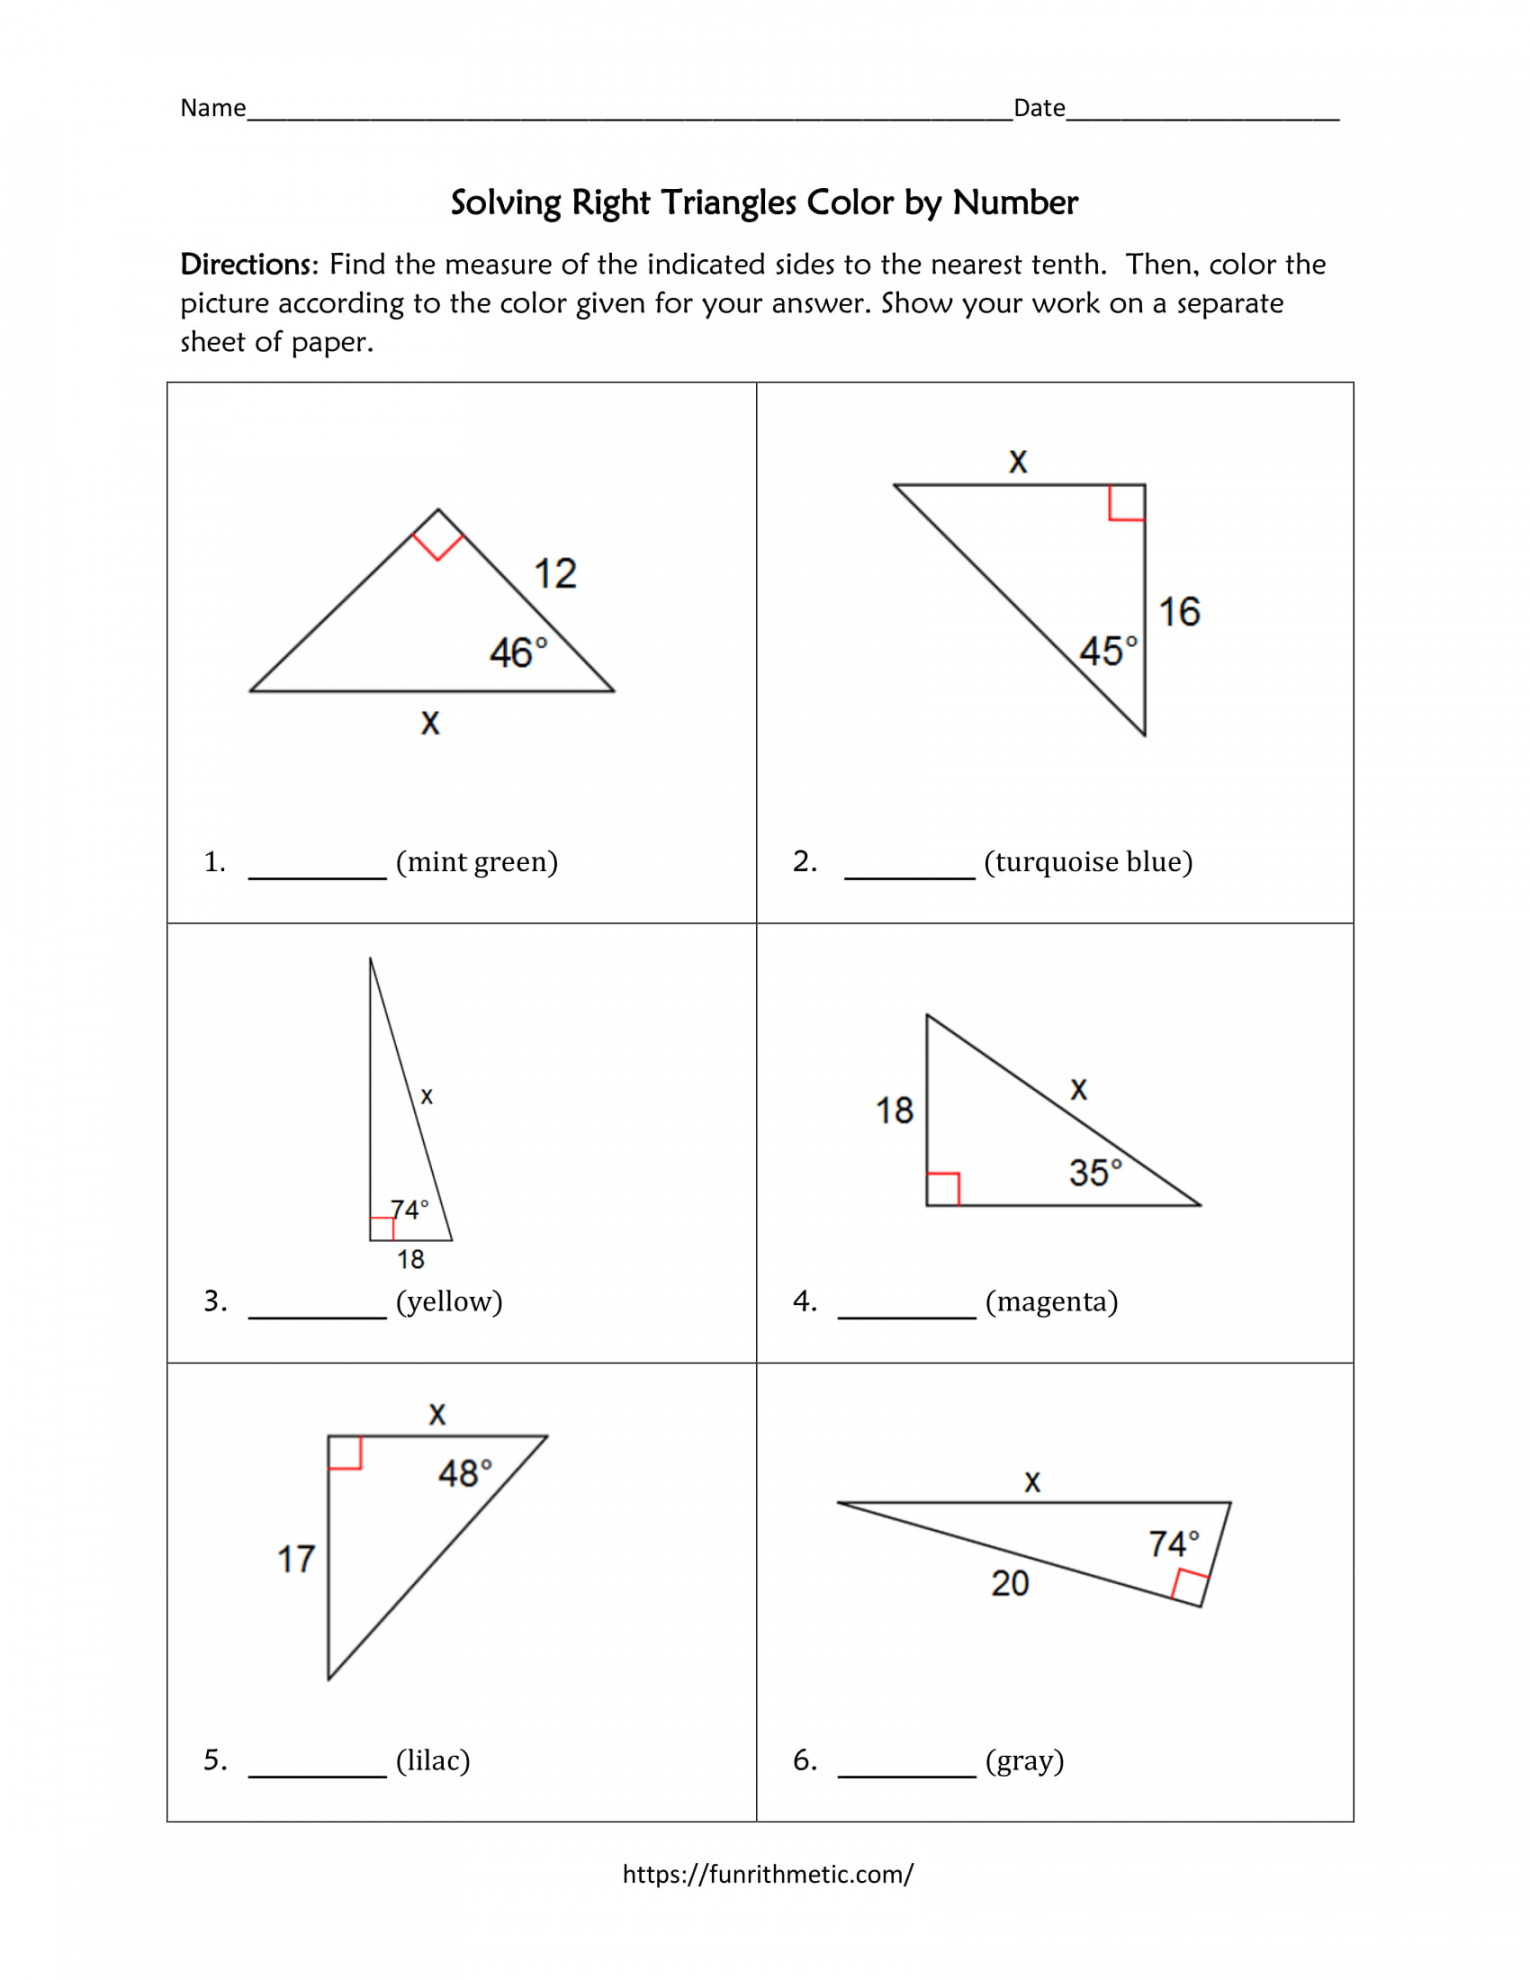 Solving Right Triangles Color by Number